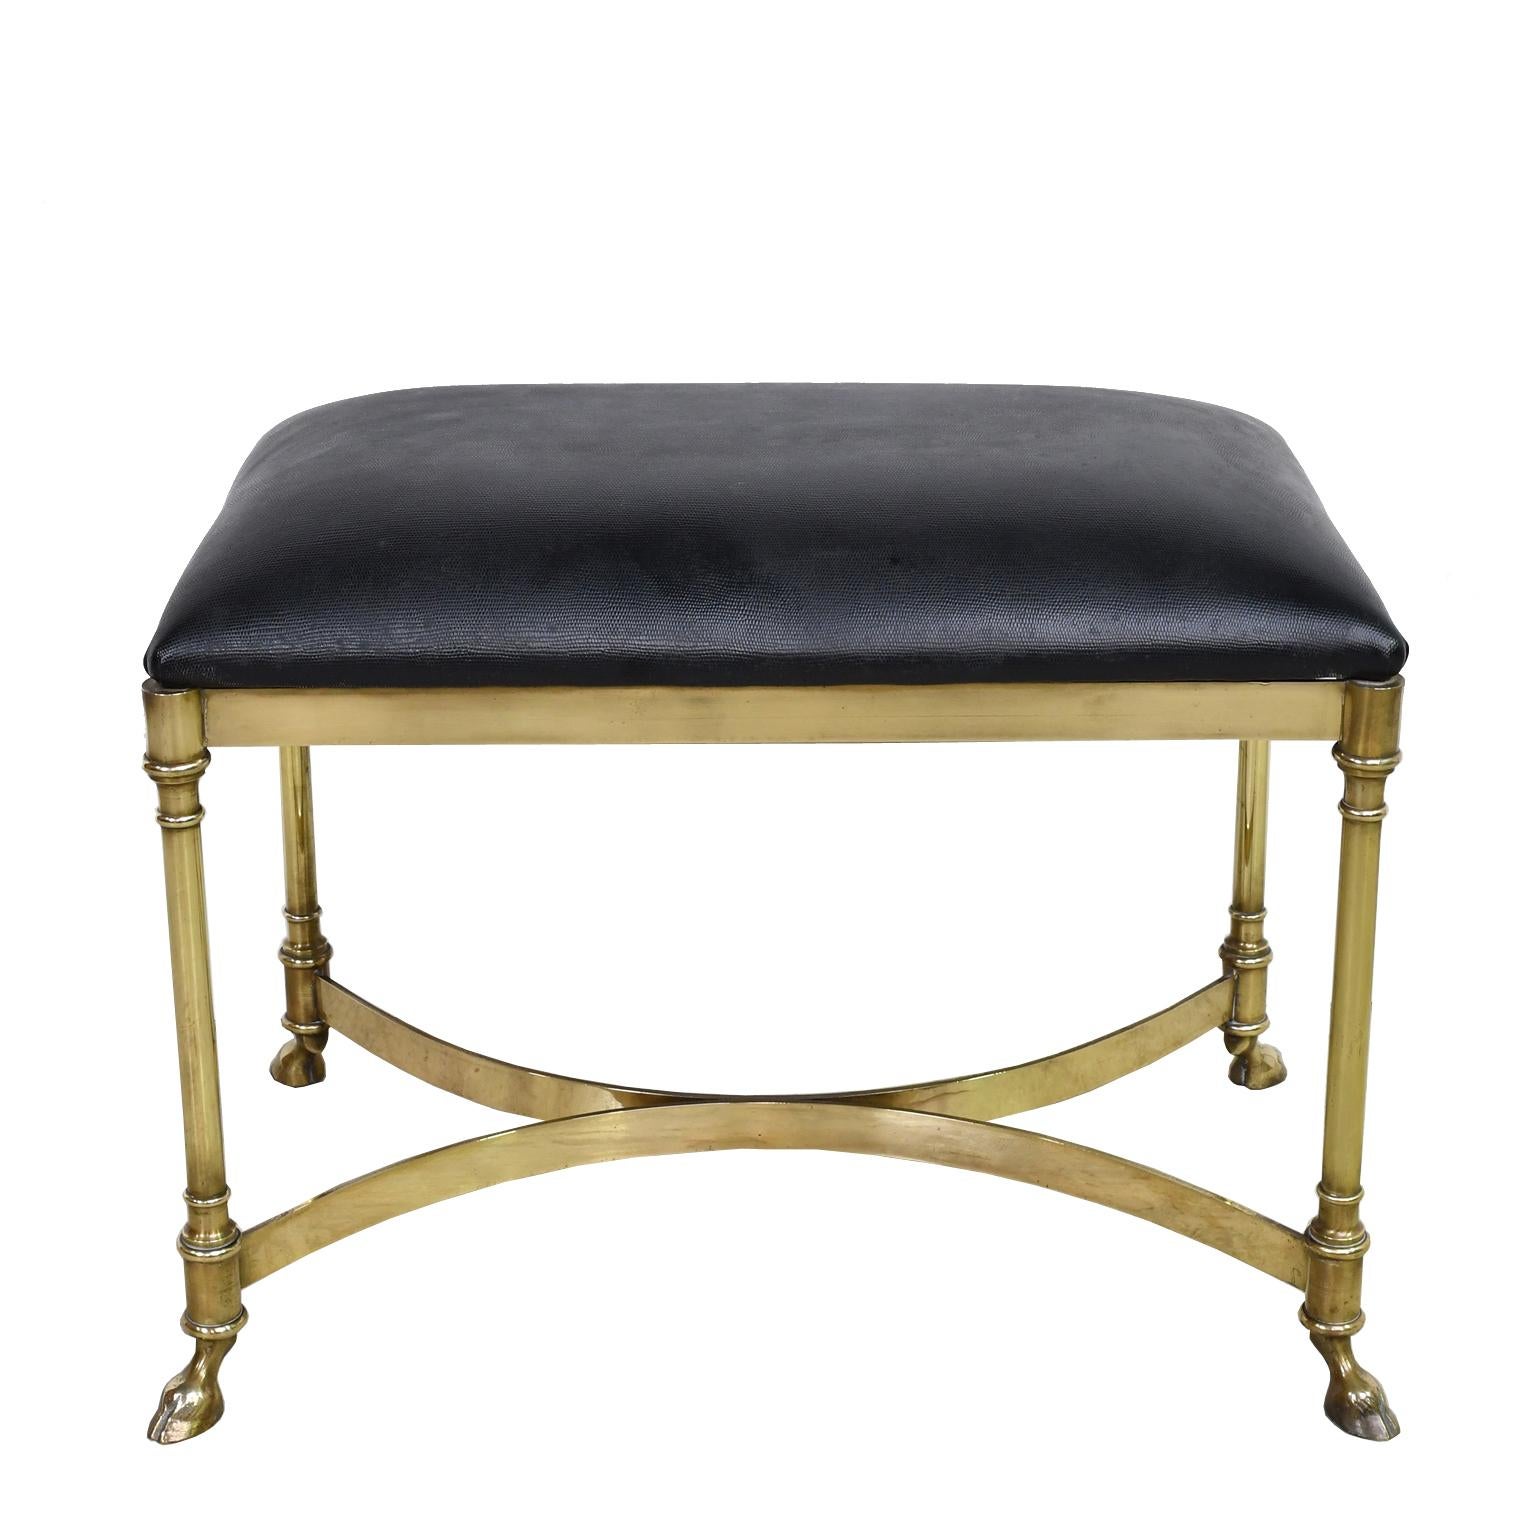 Cast Neoclassical-Style Vintage Italian Stool w/ Brass Frame & Black Upholstered Seat